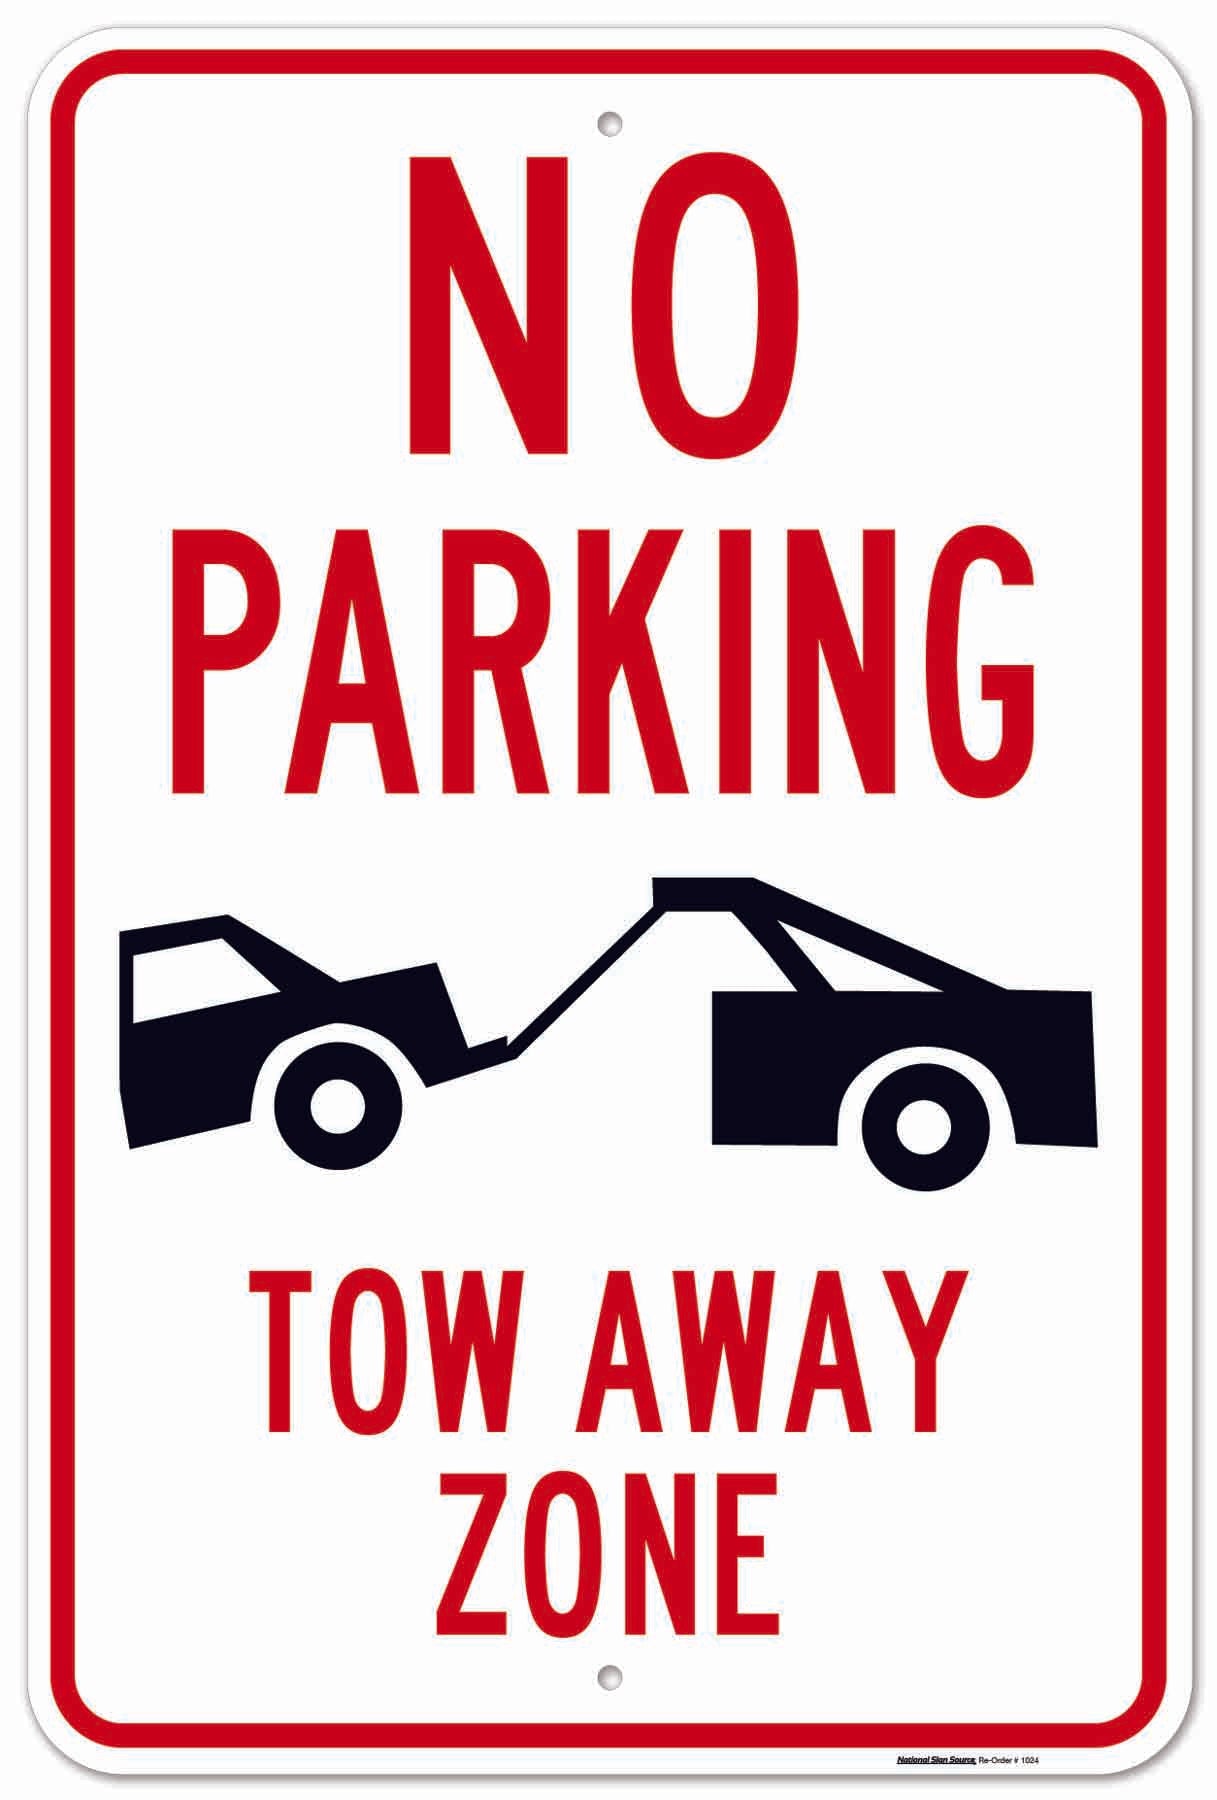 No parking tow away zone sign.  Aluminum sign with car being towed away by tow truck image.  Reflective aluminum no parking sign